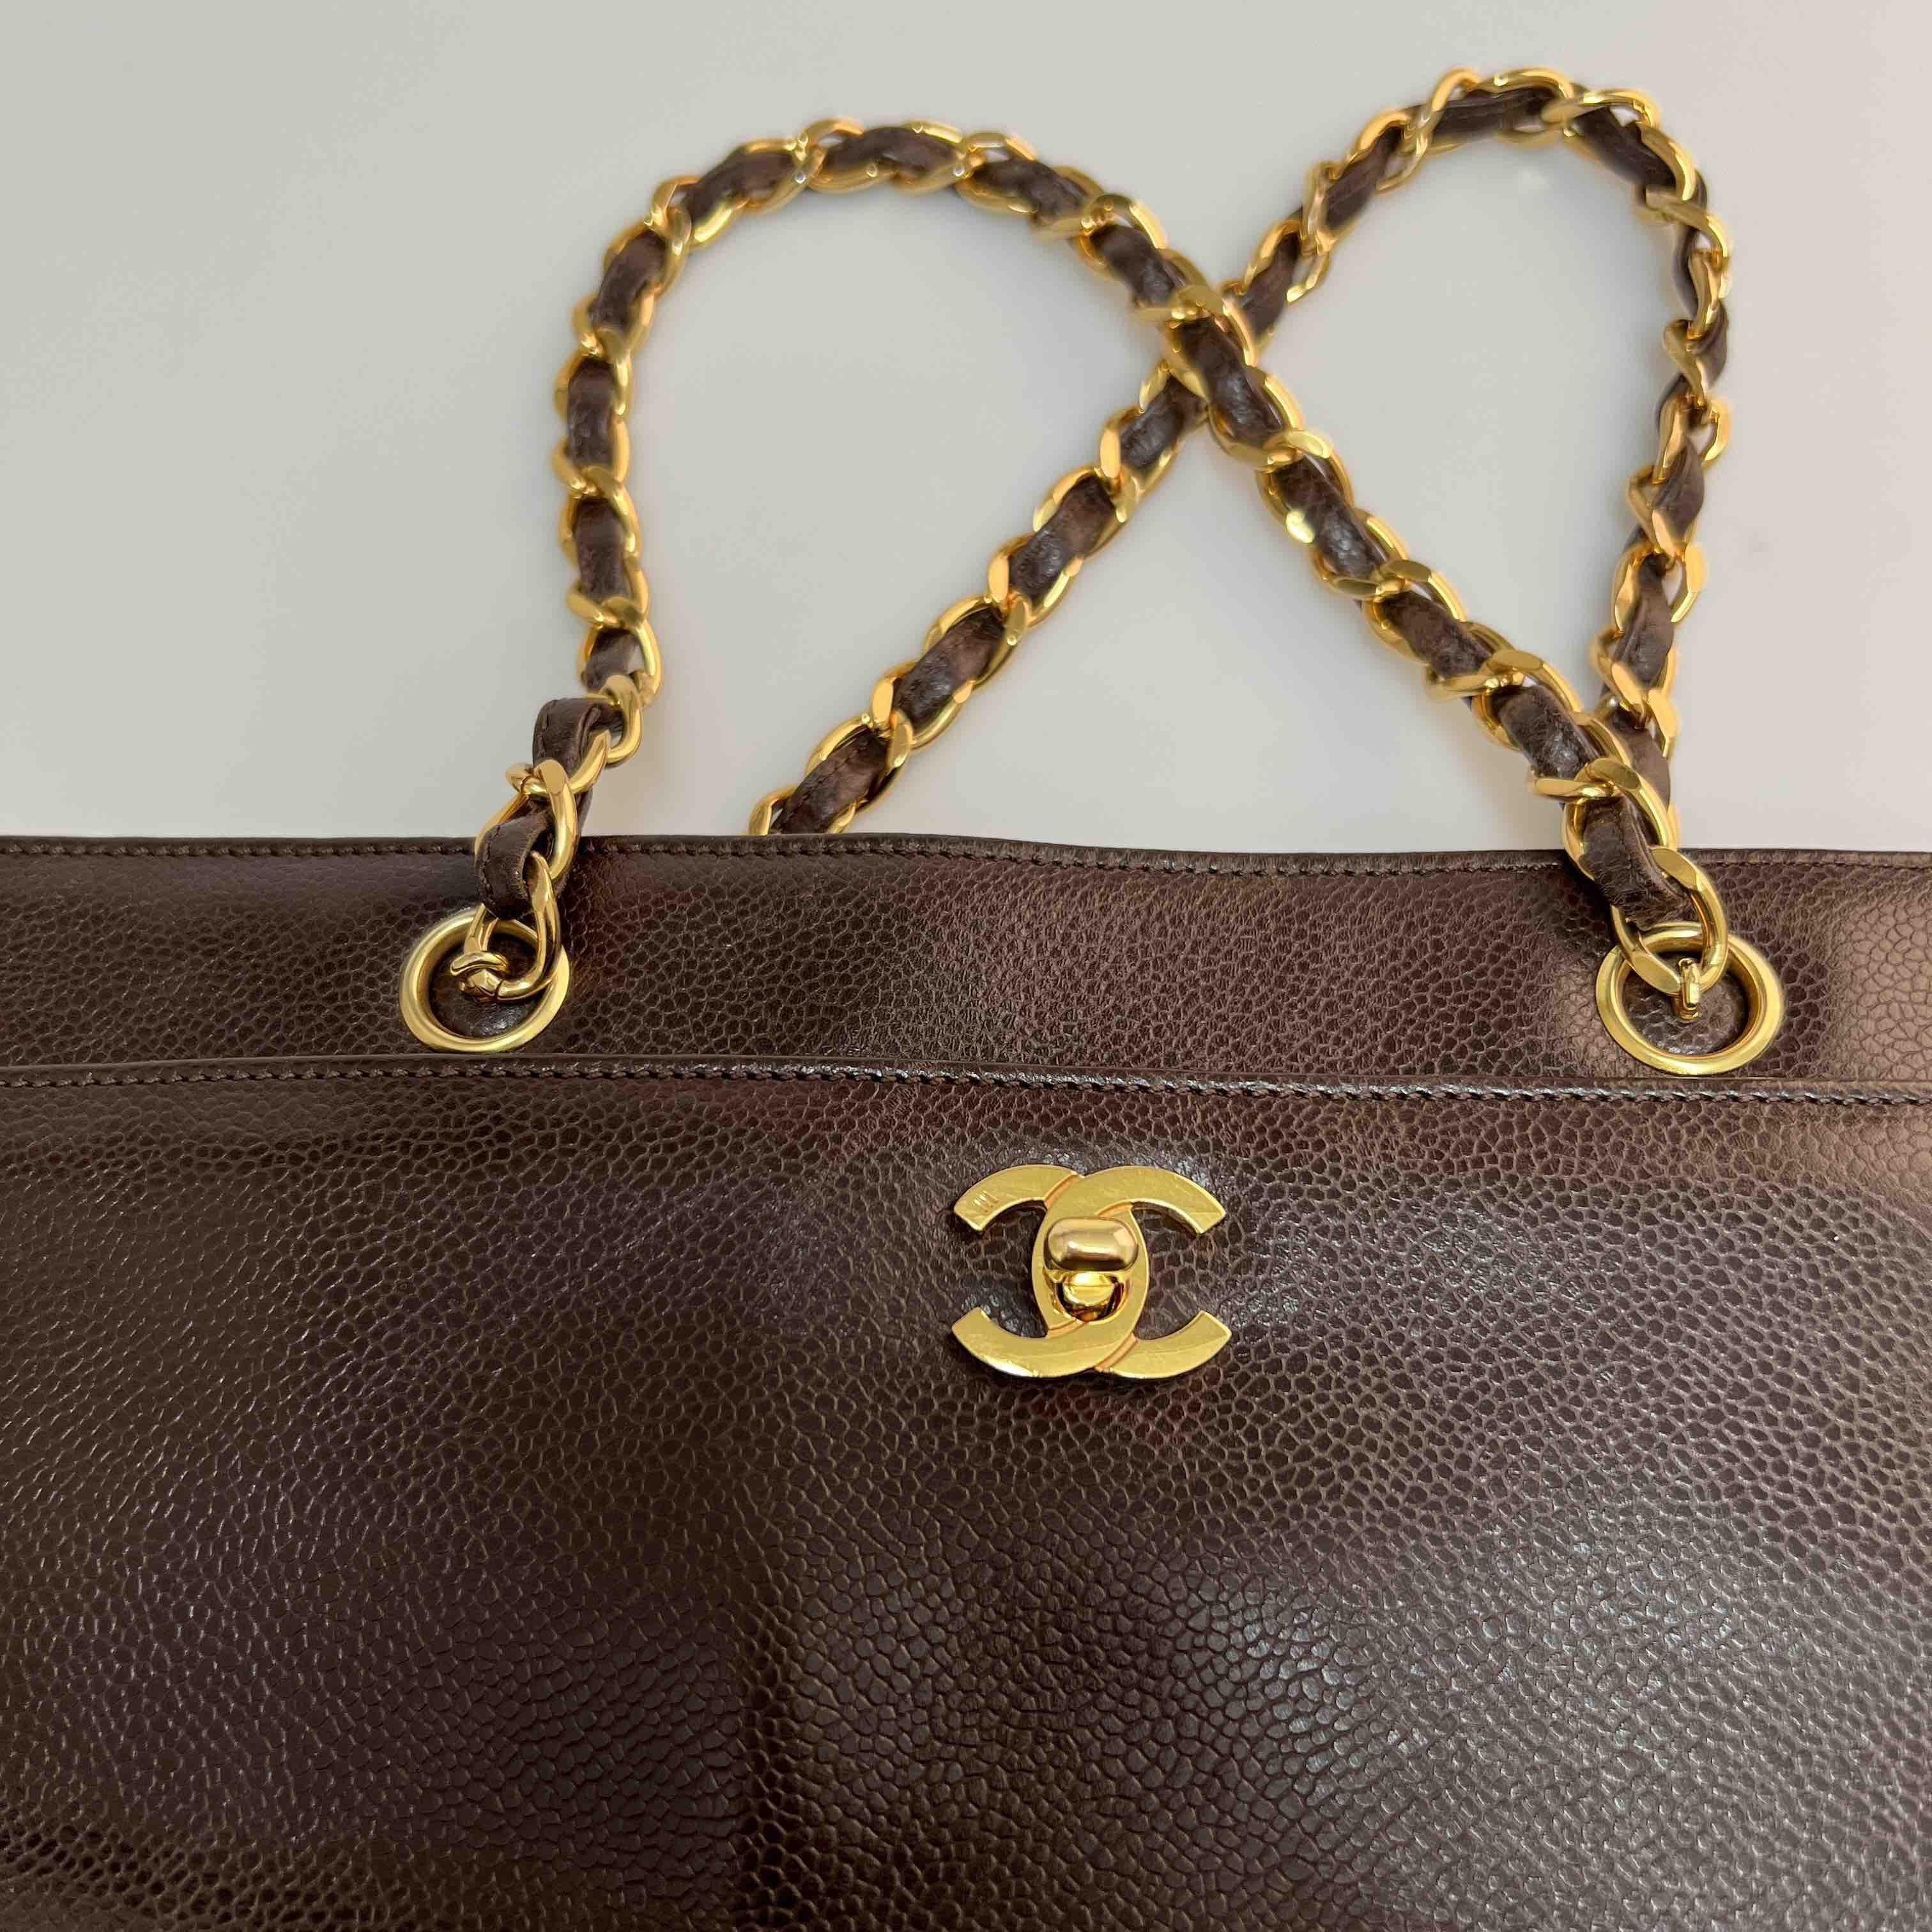 Vintage CHANEL Tote Bag in Brown Grained Leather 1